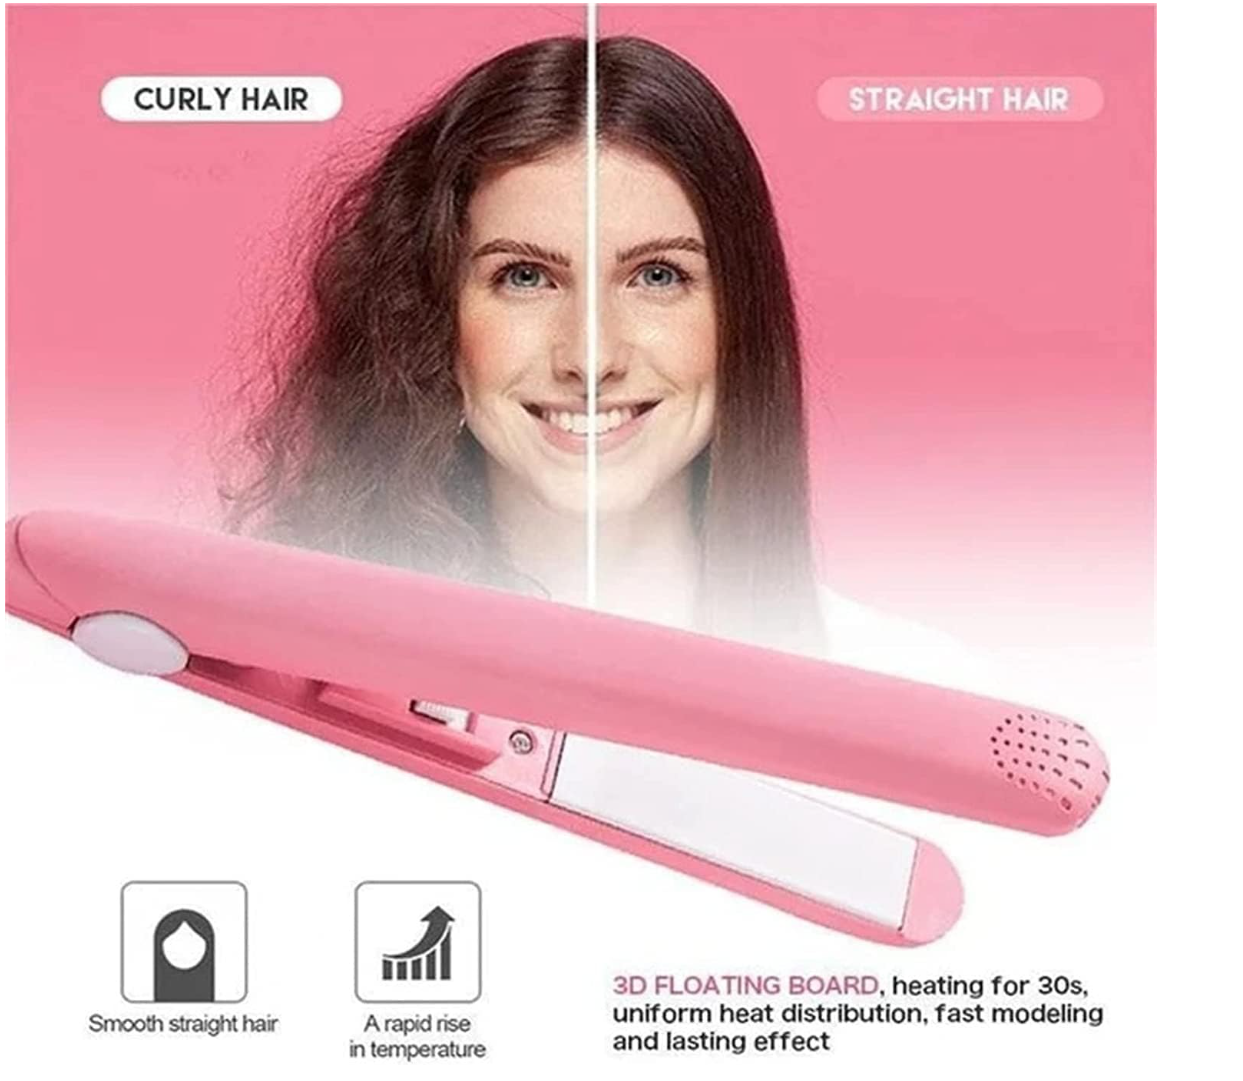 Multiple Colors Hair Straightener, 2 in 1Portable Hair Straightener and Curler Instants Heating Quick Hair Styling 4Colors Mini Hair Straightener Ceramic Tourmaline Plate Beauty Flat Iron Heating Curler